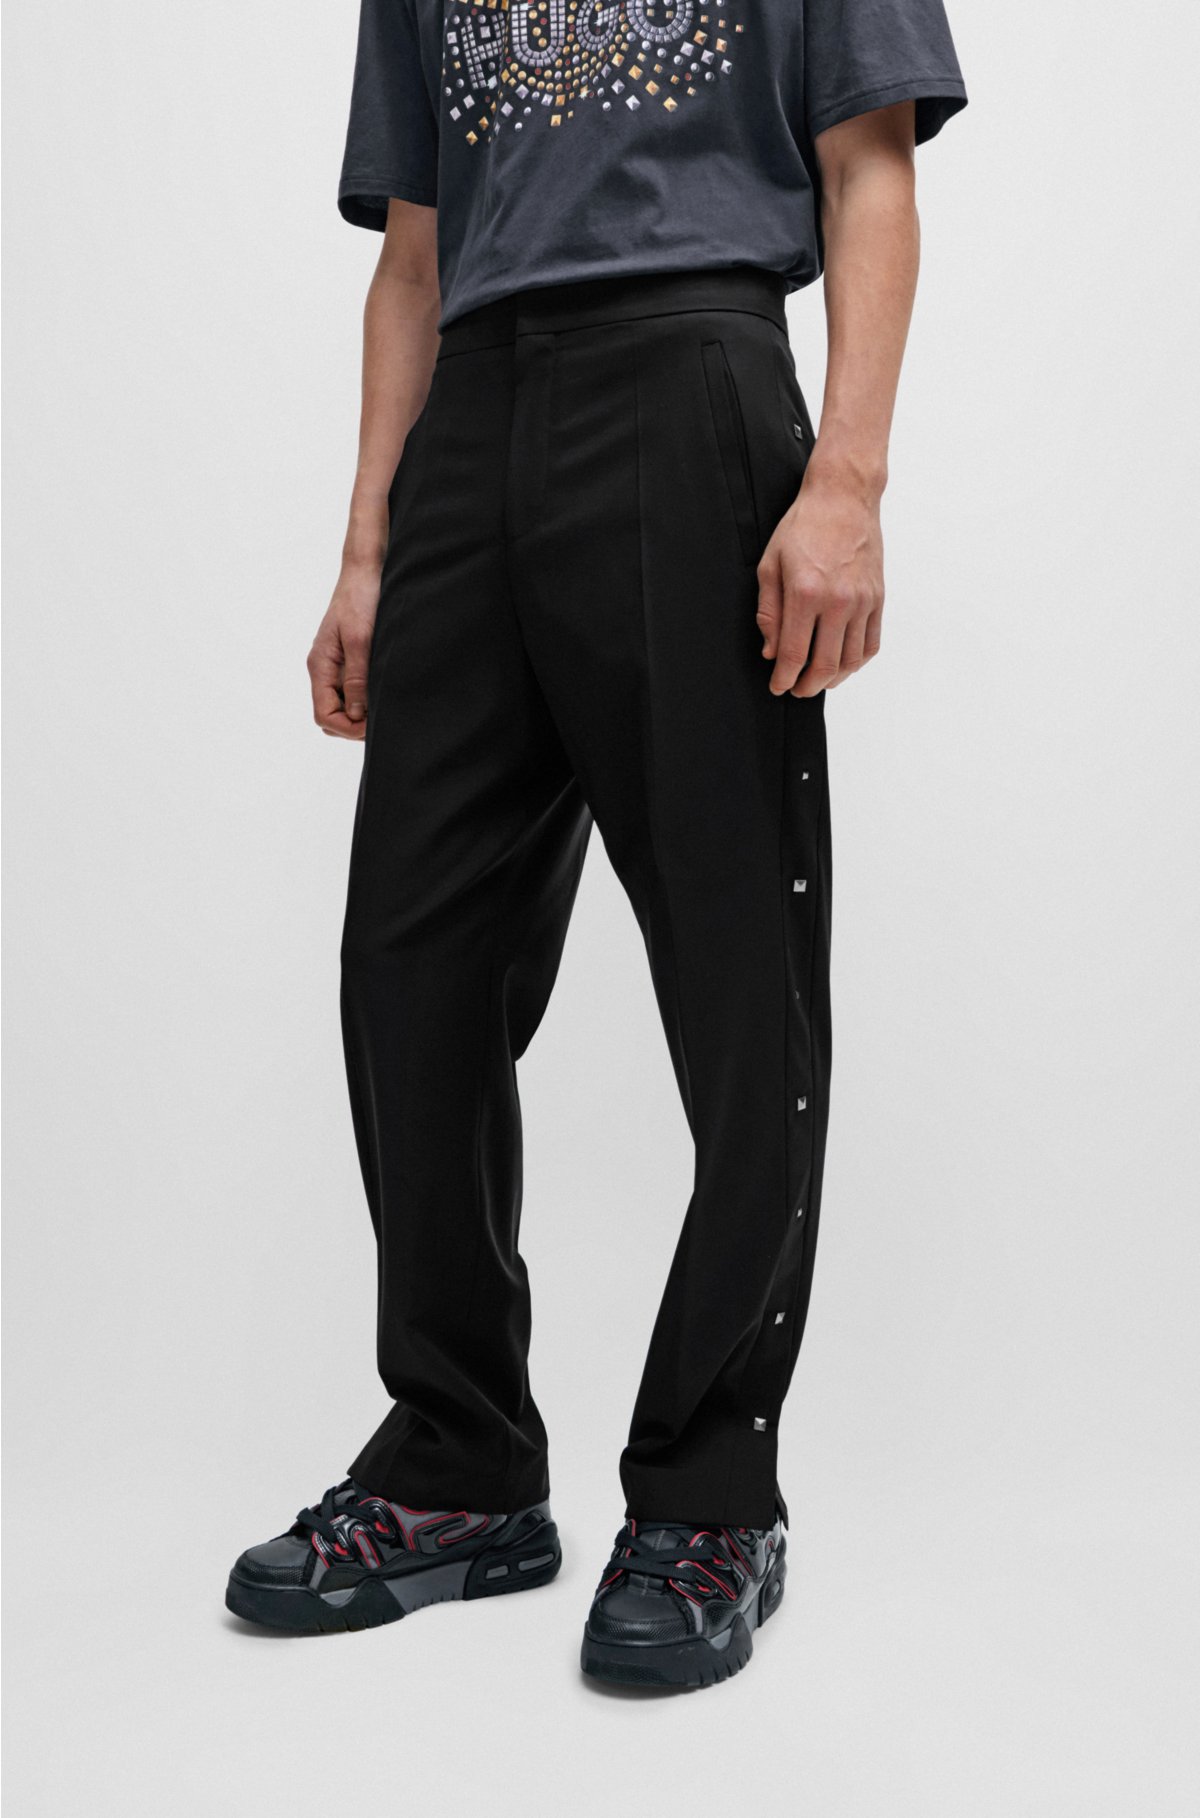 HUGO - Slim-fit trousers with studded side seams